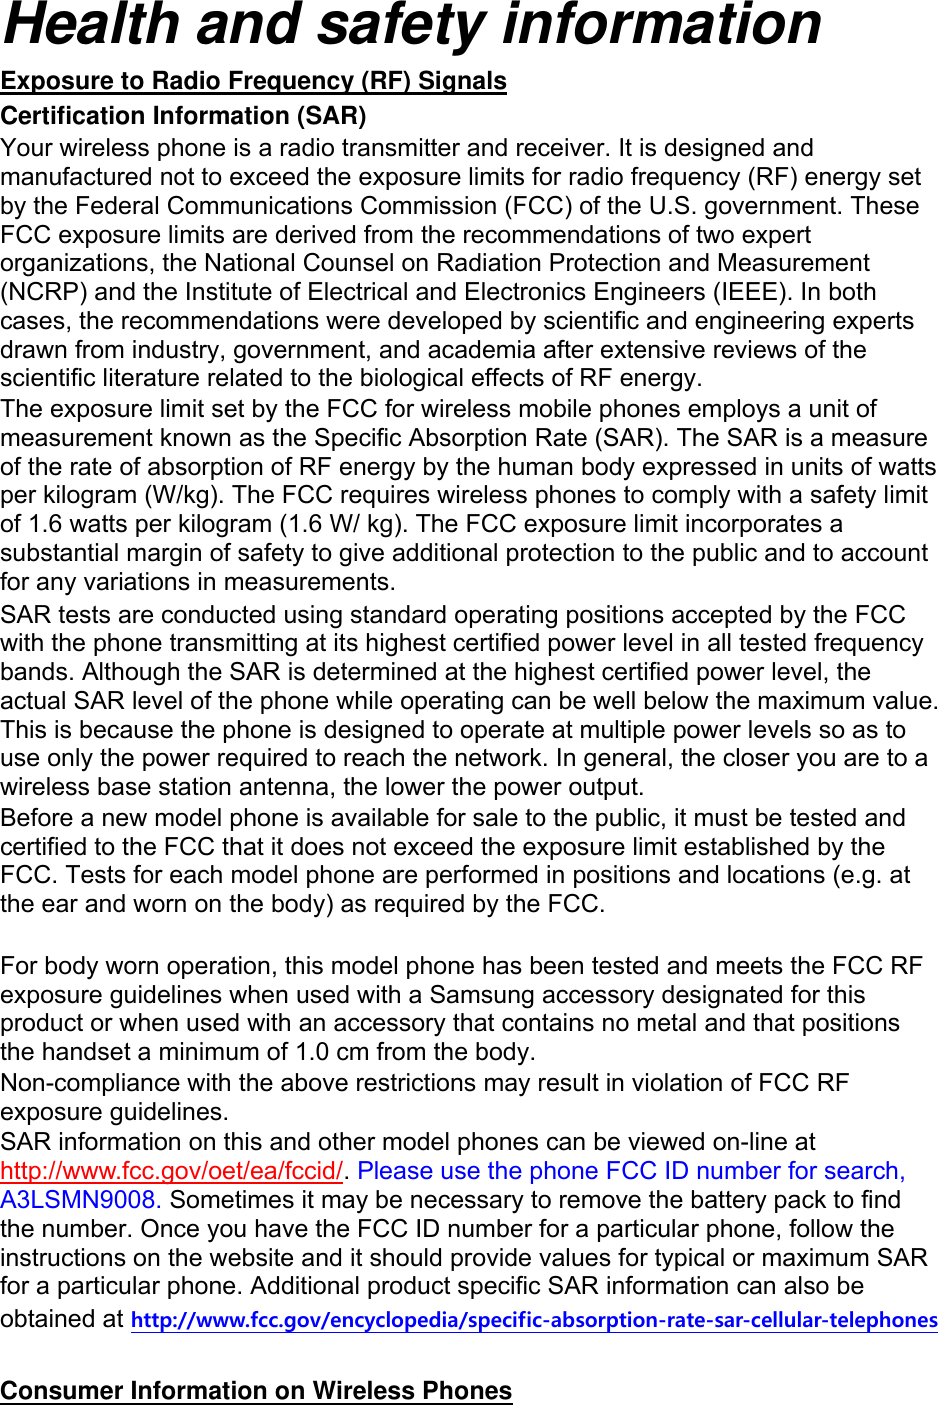 Health and safety information Exposure to Radio Frequency (RF) Signals Certification Information (SAR) Your wireless phone is a radio transmitter and receiver. It is designed and manufactured not to exceed the exposure limits for radio frequency (RF) energy set by the Federal Communications Commission (FCC) of the U.S. government. These FCC exposure limits are derived from the recommendations of two expert organizations, the National Counsel on Radiation Protection and Measurement (NCRP) and the Institute of Electrical and Electronics Engineers (IEEE). In both cases, the recommendations were developed by scientific and engineering experts drawn from industry, government, and academia after extensive reviews of the scientific literature related to the biological effects of RF energy. The exposure limit set by the FCC for wireless mobile phones employs a unit of measurement known as the Specific Absorption Rate (SAR). The SAR is a measure of the rate of absorption of RF energy by the human body expressed in units of watts per kilogram (W/kg). The FCC requires wireless phones to comply with a safety limit of 1.6 watts per kilogram (1.6 W/ kg). The FCC exposure limit incorporates a substantial margin of safety to give additional protection to the public and to account for any variations in measurements. SAR tests are conducted using standard operating positions accepted by the FCC with the phone transmitting at its highest certified power level in all tested frequency bands. Although the SAR is determined at the highest certified power level, the actual SAR level of the phone while operating can be well below the maximum value. This is because the phone is designed to operate at multiple power levels so as to use only the power required to reach the network. In general, the closer you are to a wireless base station antenna, the lower the power output. Before a new model phone is available for sale to the public, it must be tested and certified to the FCC that it does not exceed the exposure limit established by the FCC. Tests for each model phone are performed in positions and locations (e.g. at the ear and worn on the body) as required by the FCC.      For body worn operation, this model phone has been tested and meets the FCC RF exposure guidelines when used with a Samsung accessory designated for this product or when used with an accessory that contains no metal and that positions the handset a minimum of 1.0 cm from the body.   Non-compliance with the above restrictions may result in violation of FCC RF exposure guidelines. SAR information on this and other model phones can be viewed on-line at http://www.fcc.gov/oet/ea/fccid/. Please use the phone FCC ID number for search, A3LSMN9008. Sometimes it may be necessary to remove the battery pack to find the number. Once you have the FCC ID number for a particular phone, follow the instructions on the website and it should provide values for typical or maximum SAR for a particular phone. Additional product specific SAR information can also be obtained at http://www.fcc.gov/encyclopedia/specific-absorption-rate-sar-cellular-telephones  Consumer Information on Wireless Phones 